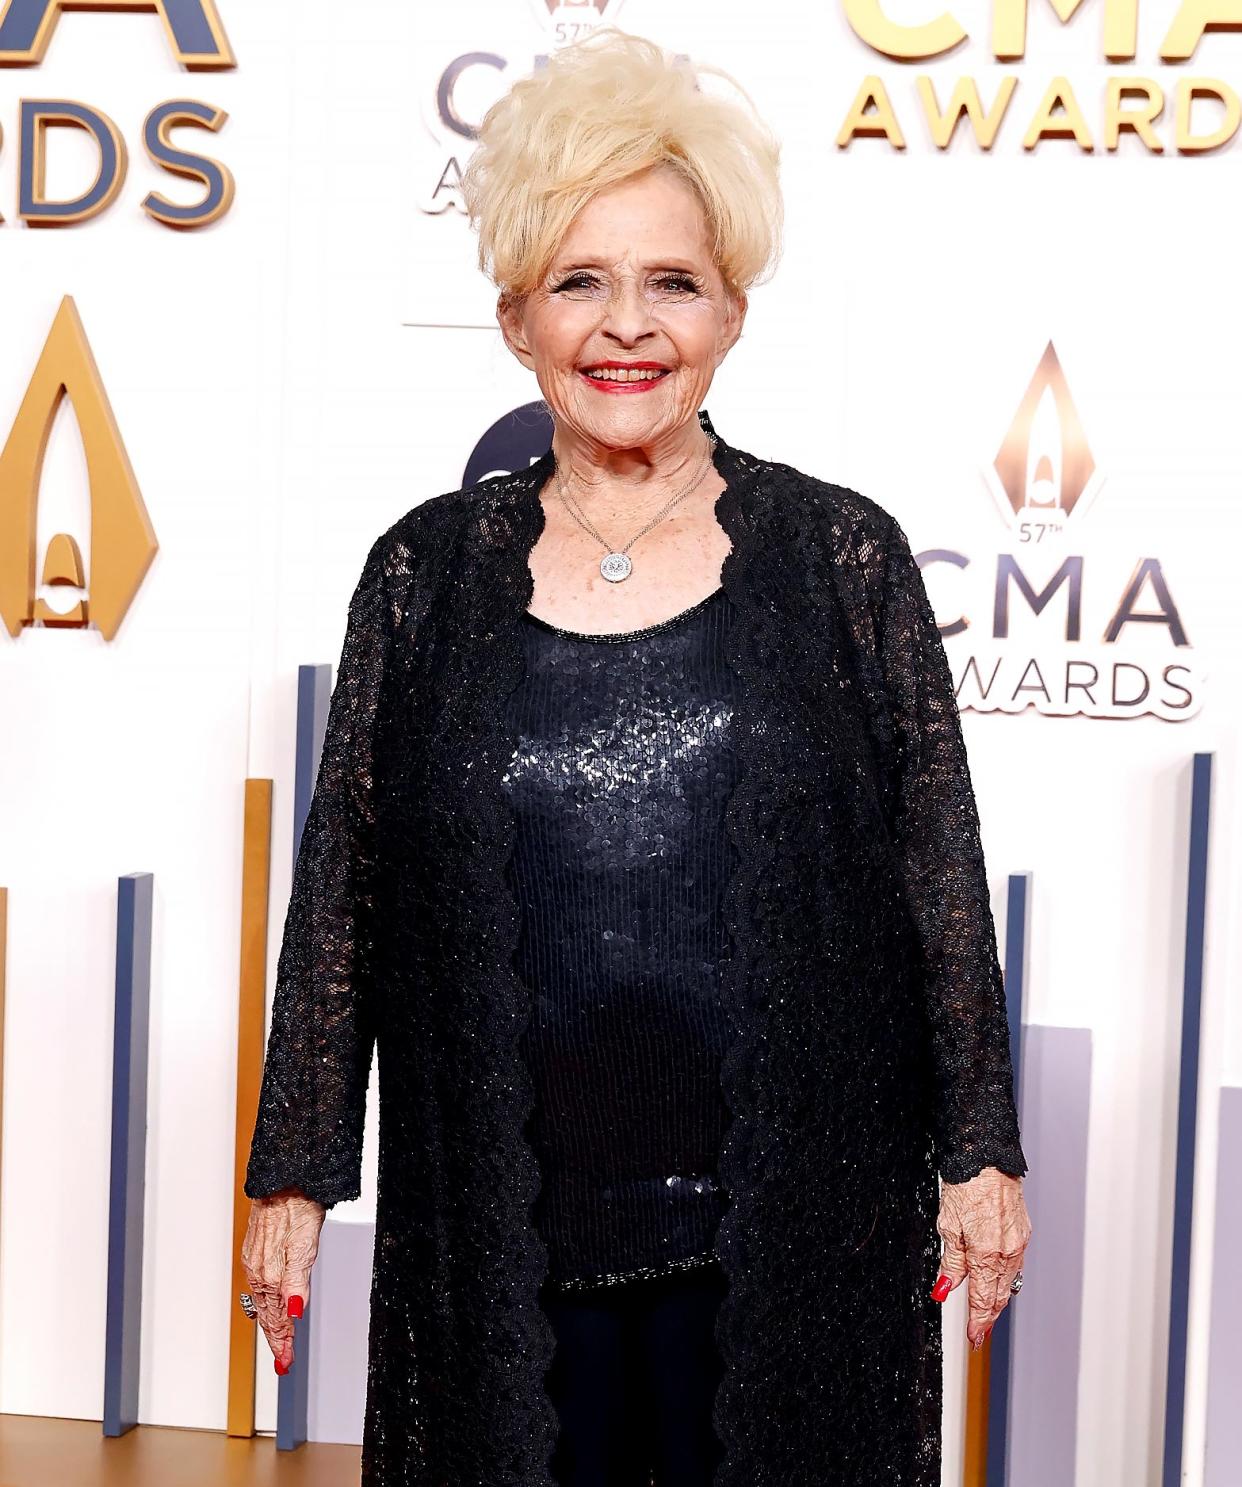 Brenda Lee Thanks ‘Home Alone’ for Helping Make ‘Rockin’ Around the Christmas Tree’ a No. 1 Hit